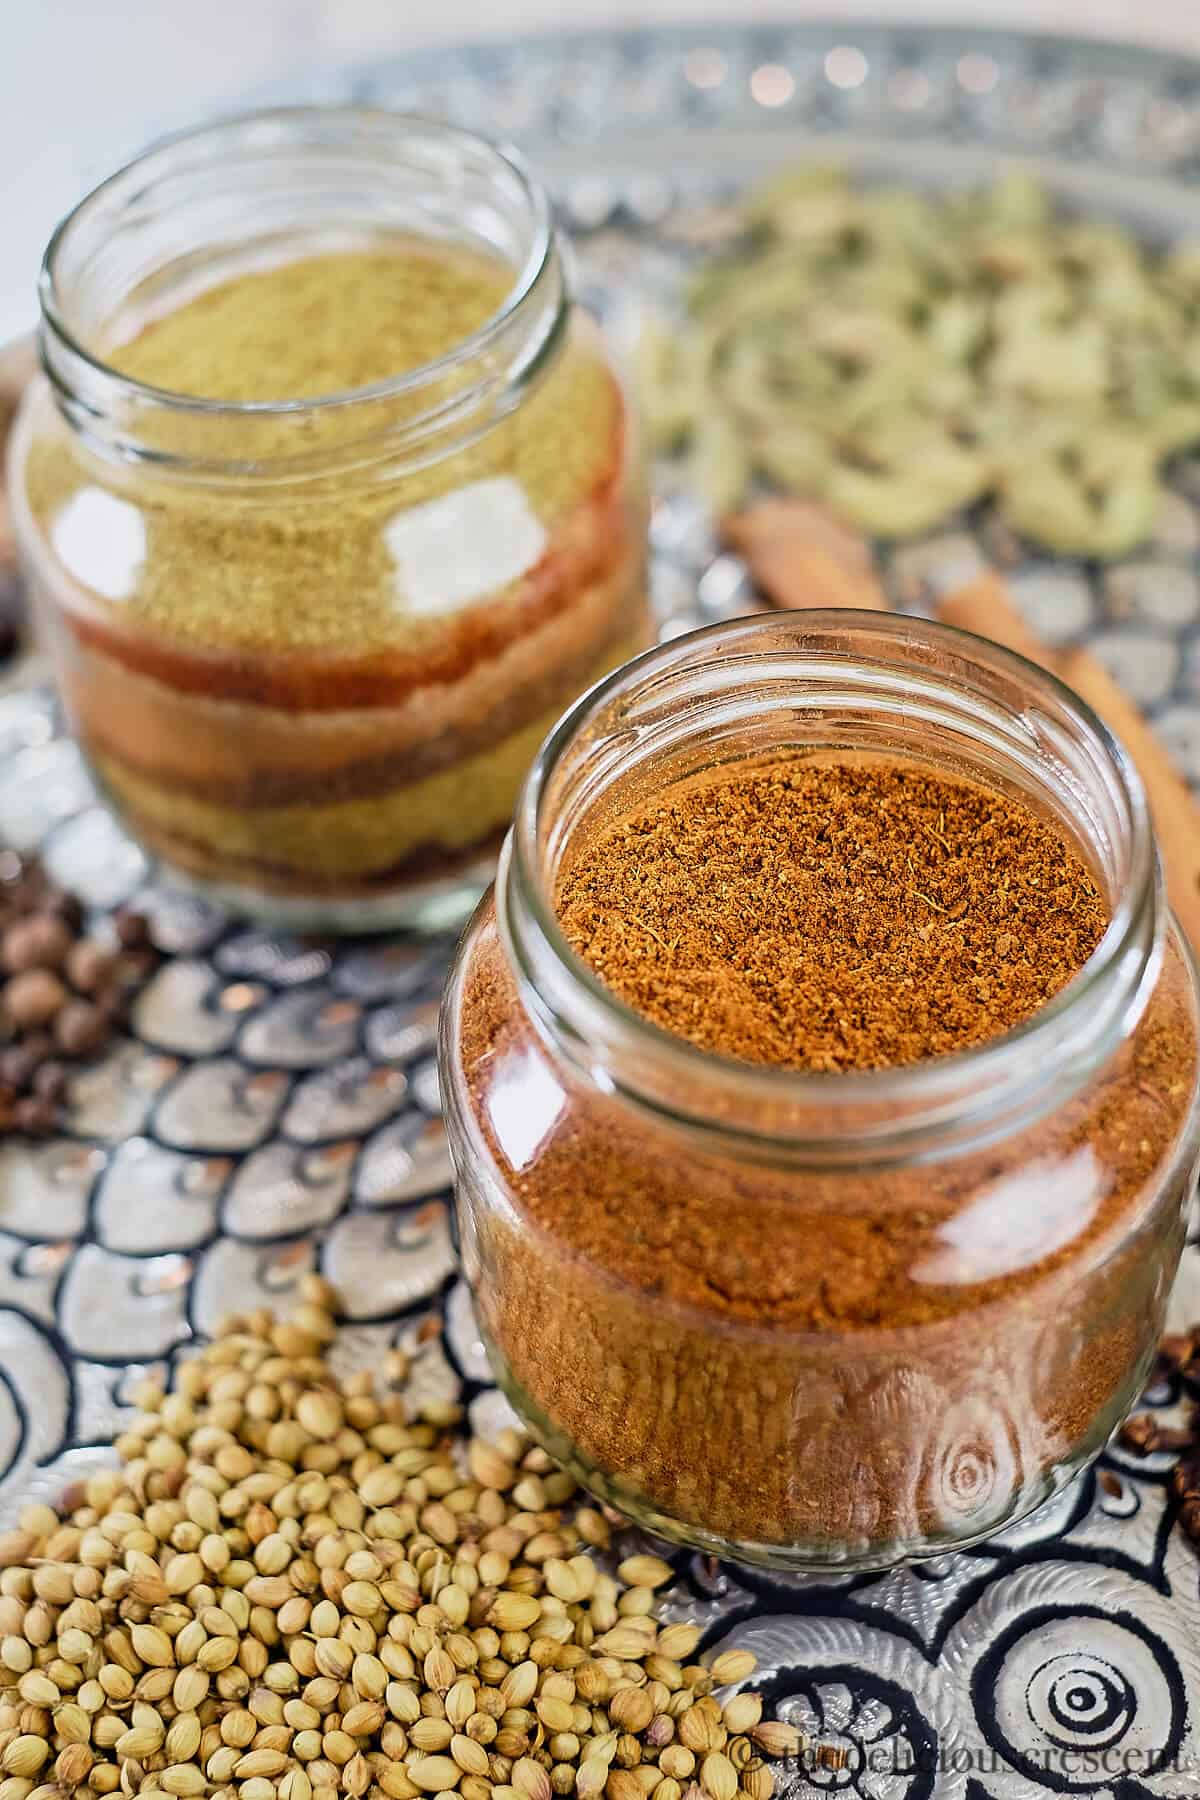 Baharat (Middle Eastern Spice Blend) - The Daring Gourmet